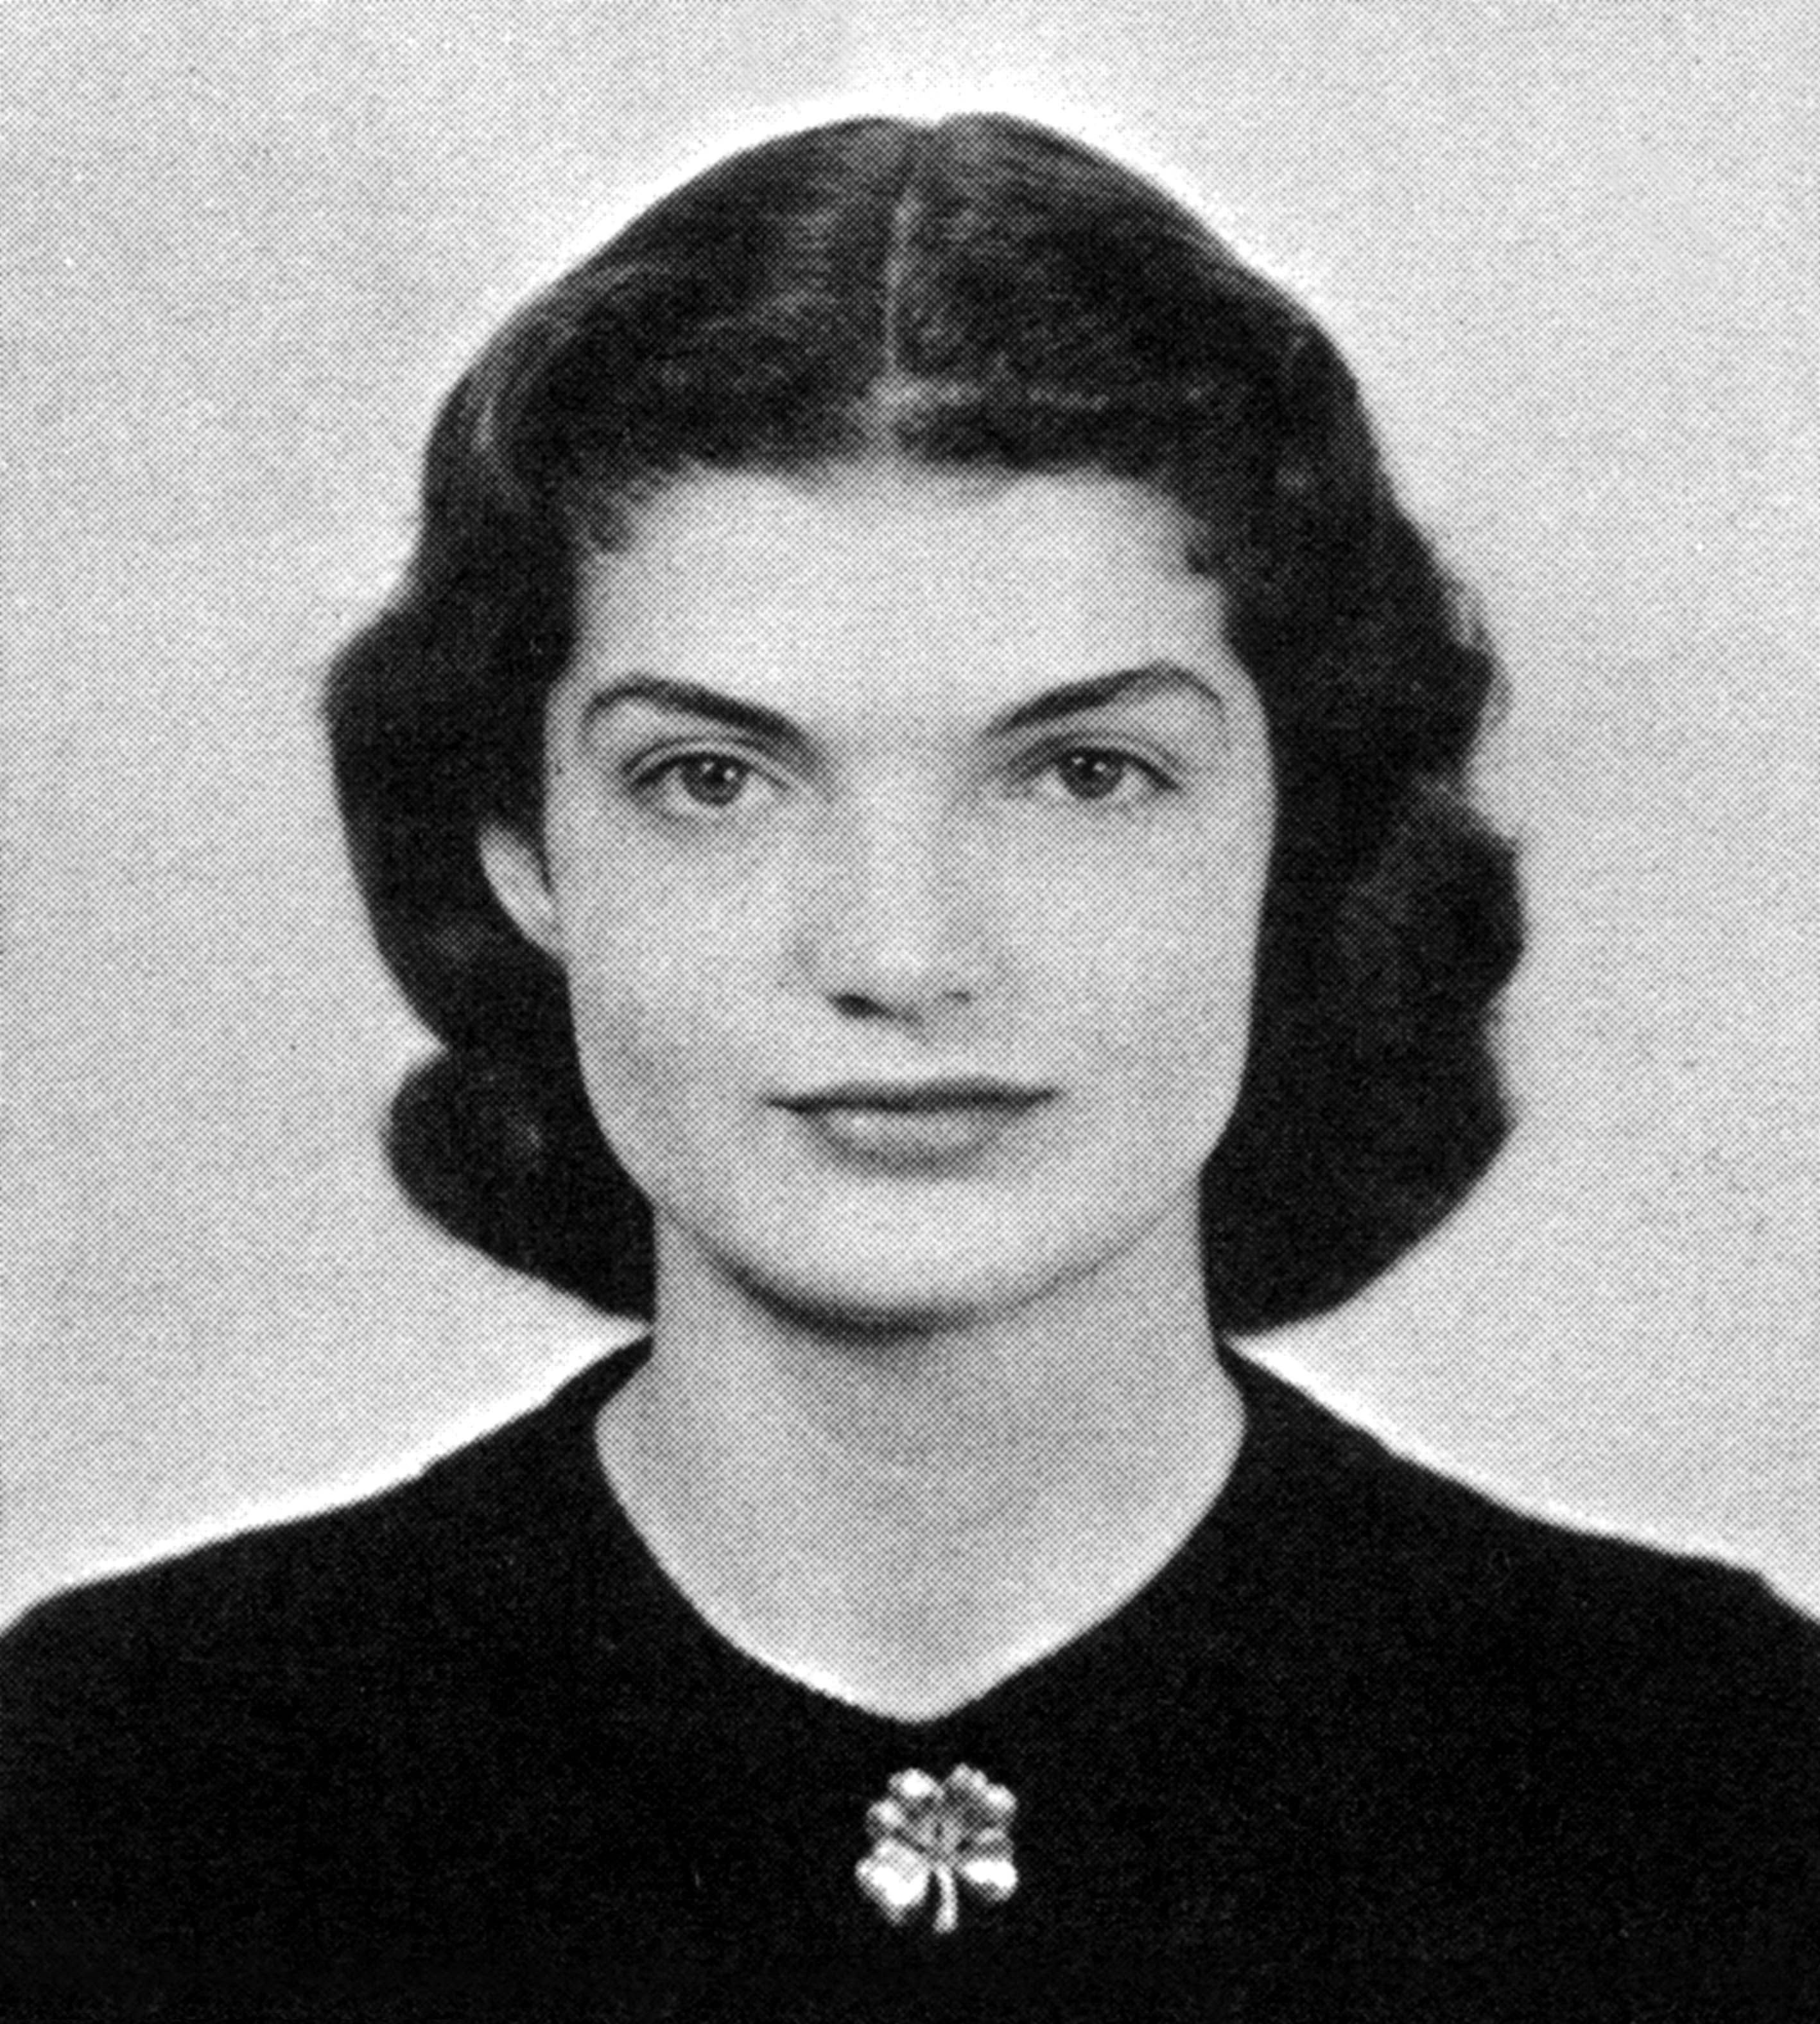 Jacqueline Lee Bouvier also known as Jackie Kennedy on October 1, 1950. | Source: Apic/Getty Images